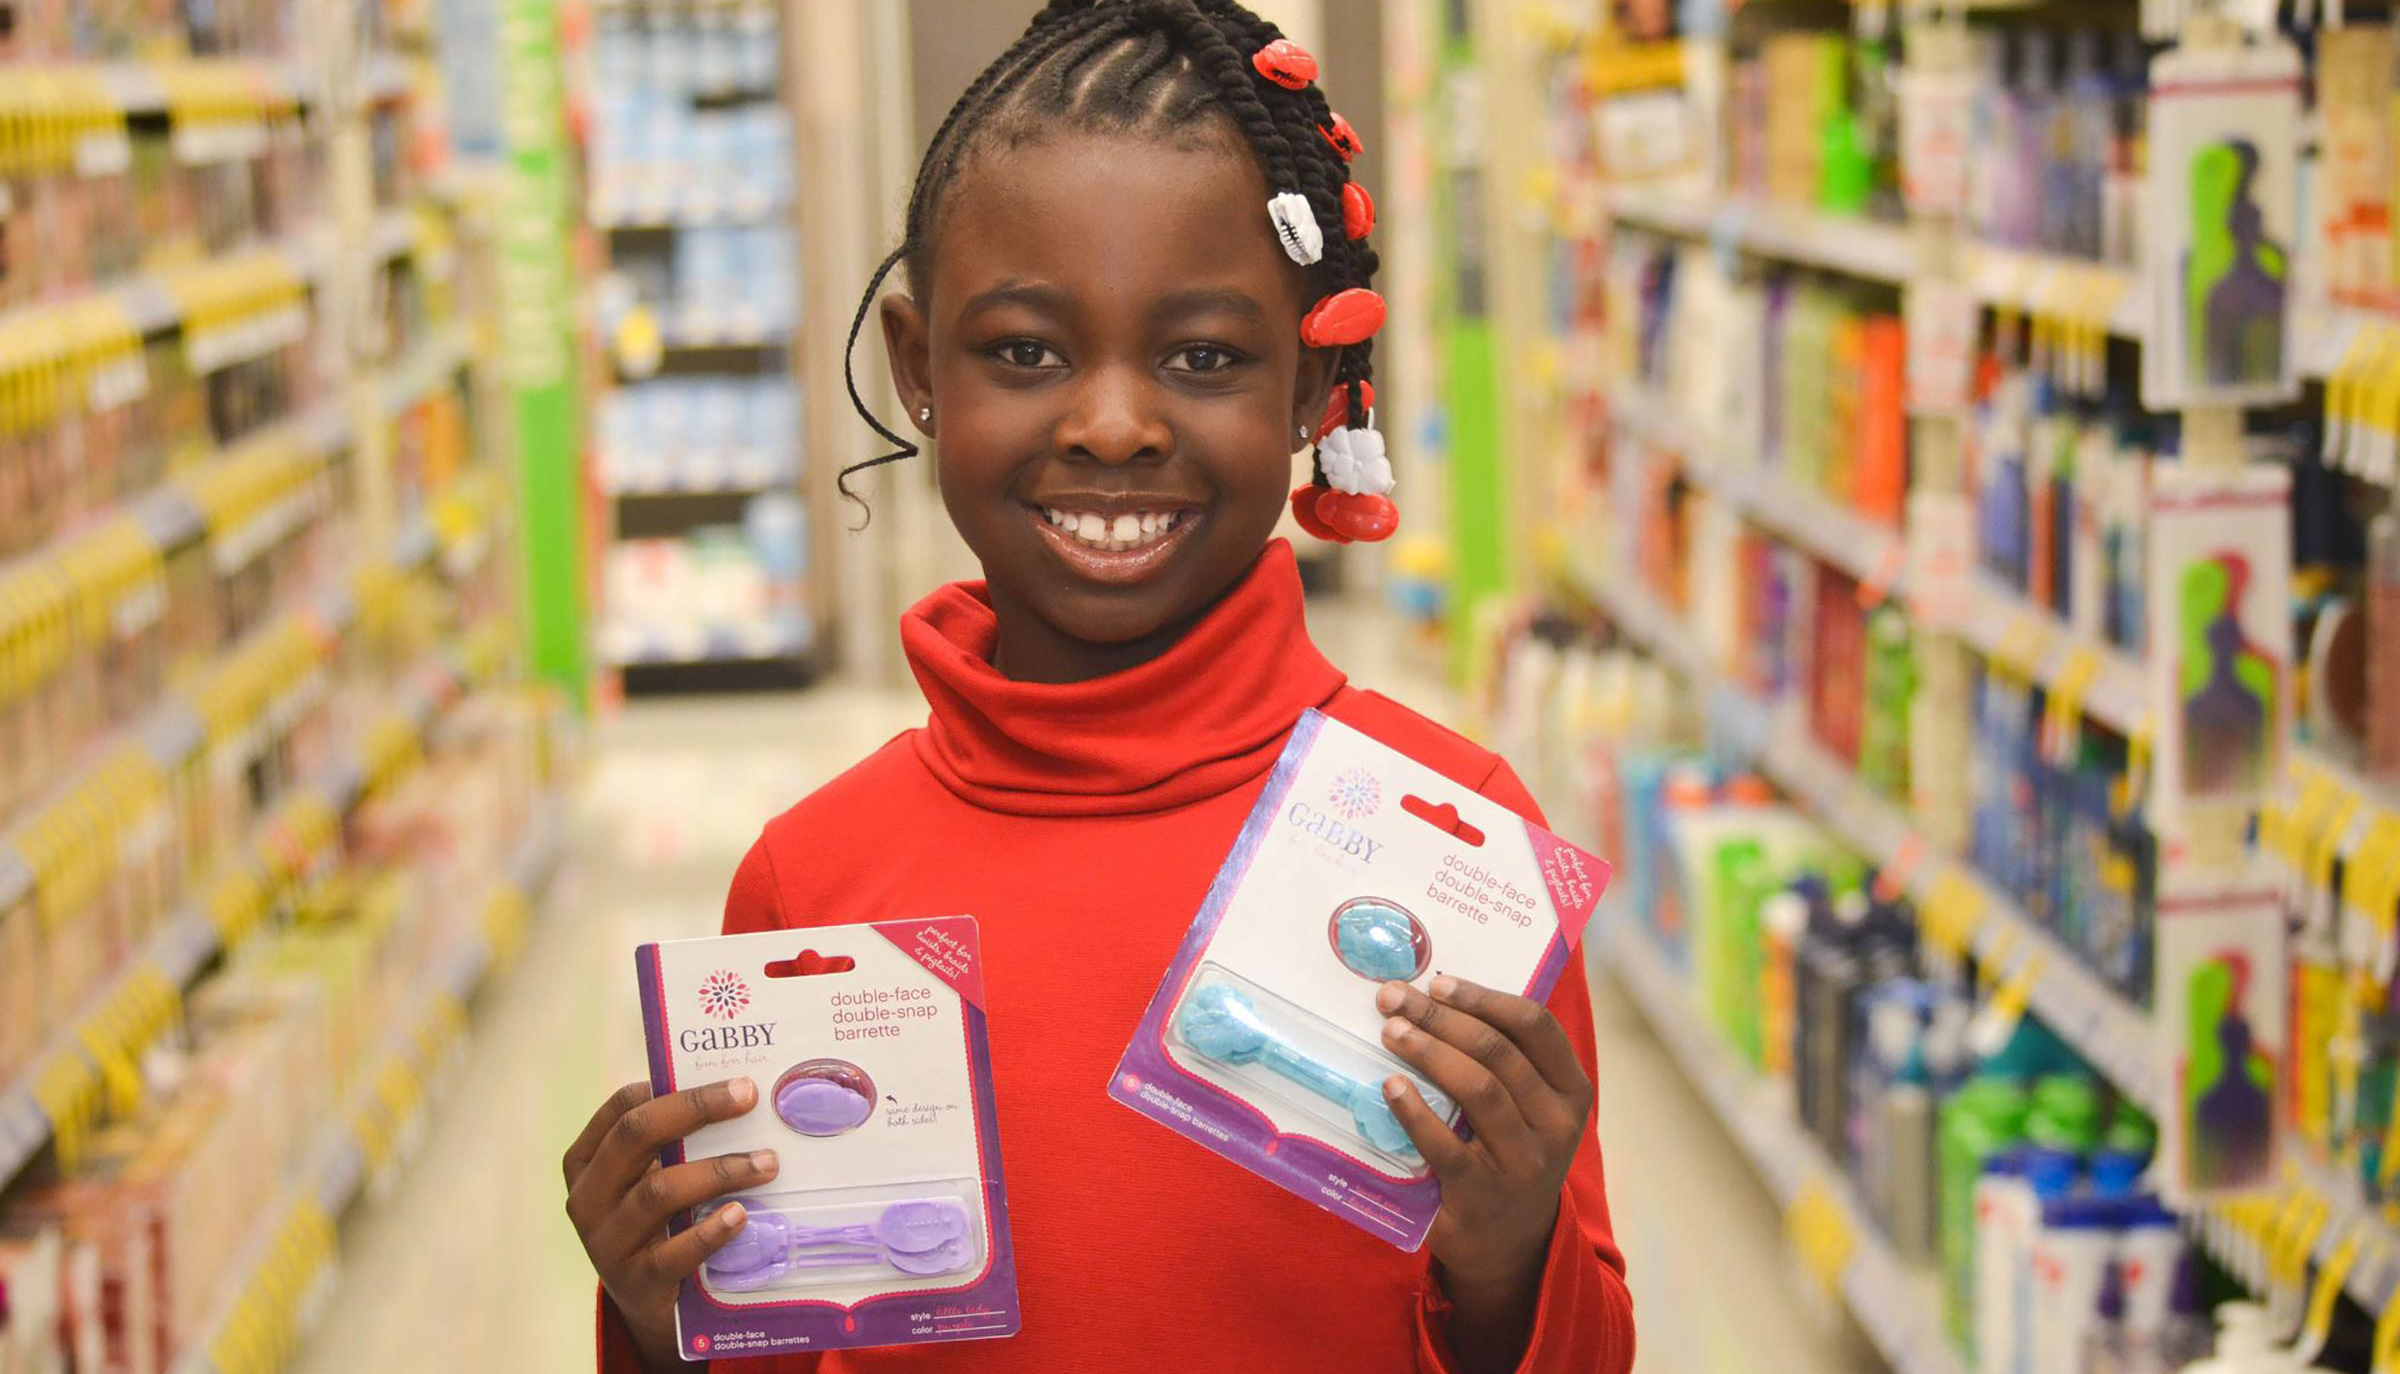 12-YEAR-OLD GABRIELLE GOODWIN LANDS A MEGA-RETAIL DEAL WITH TARGET